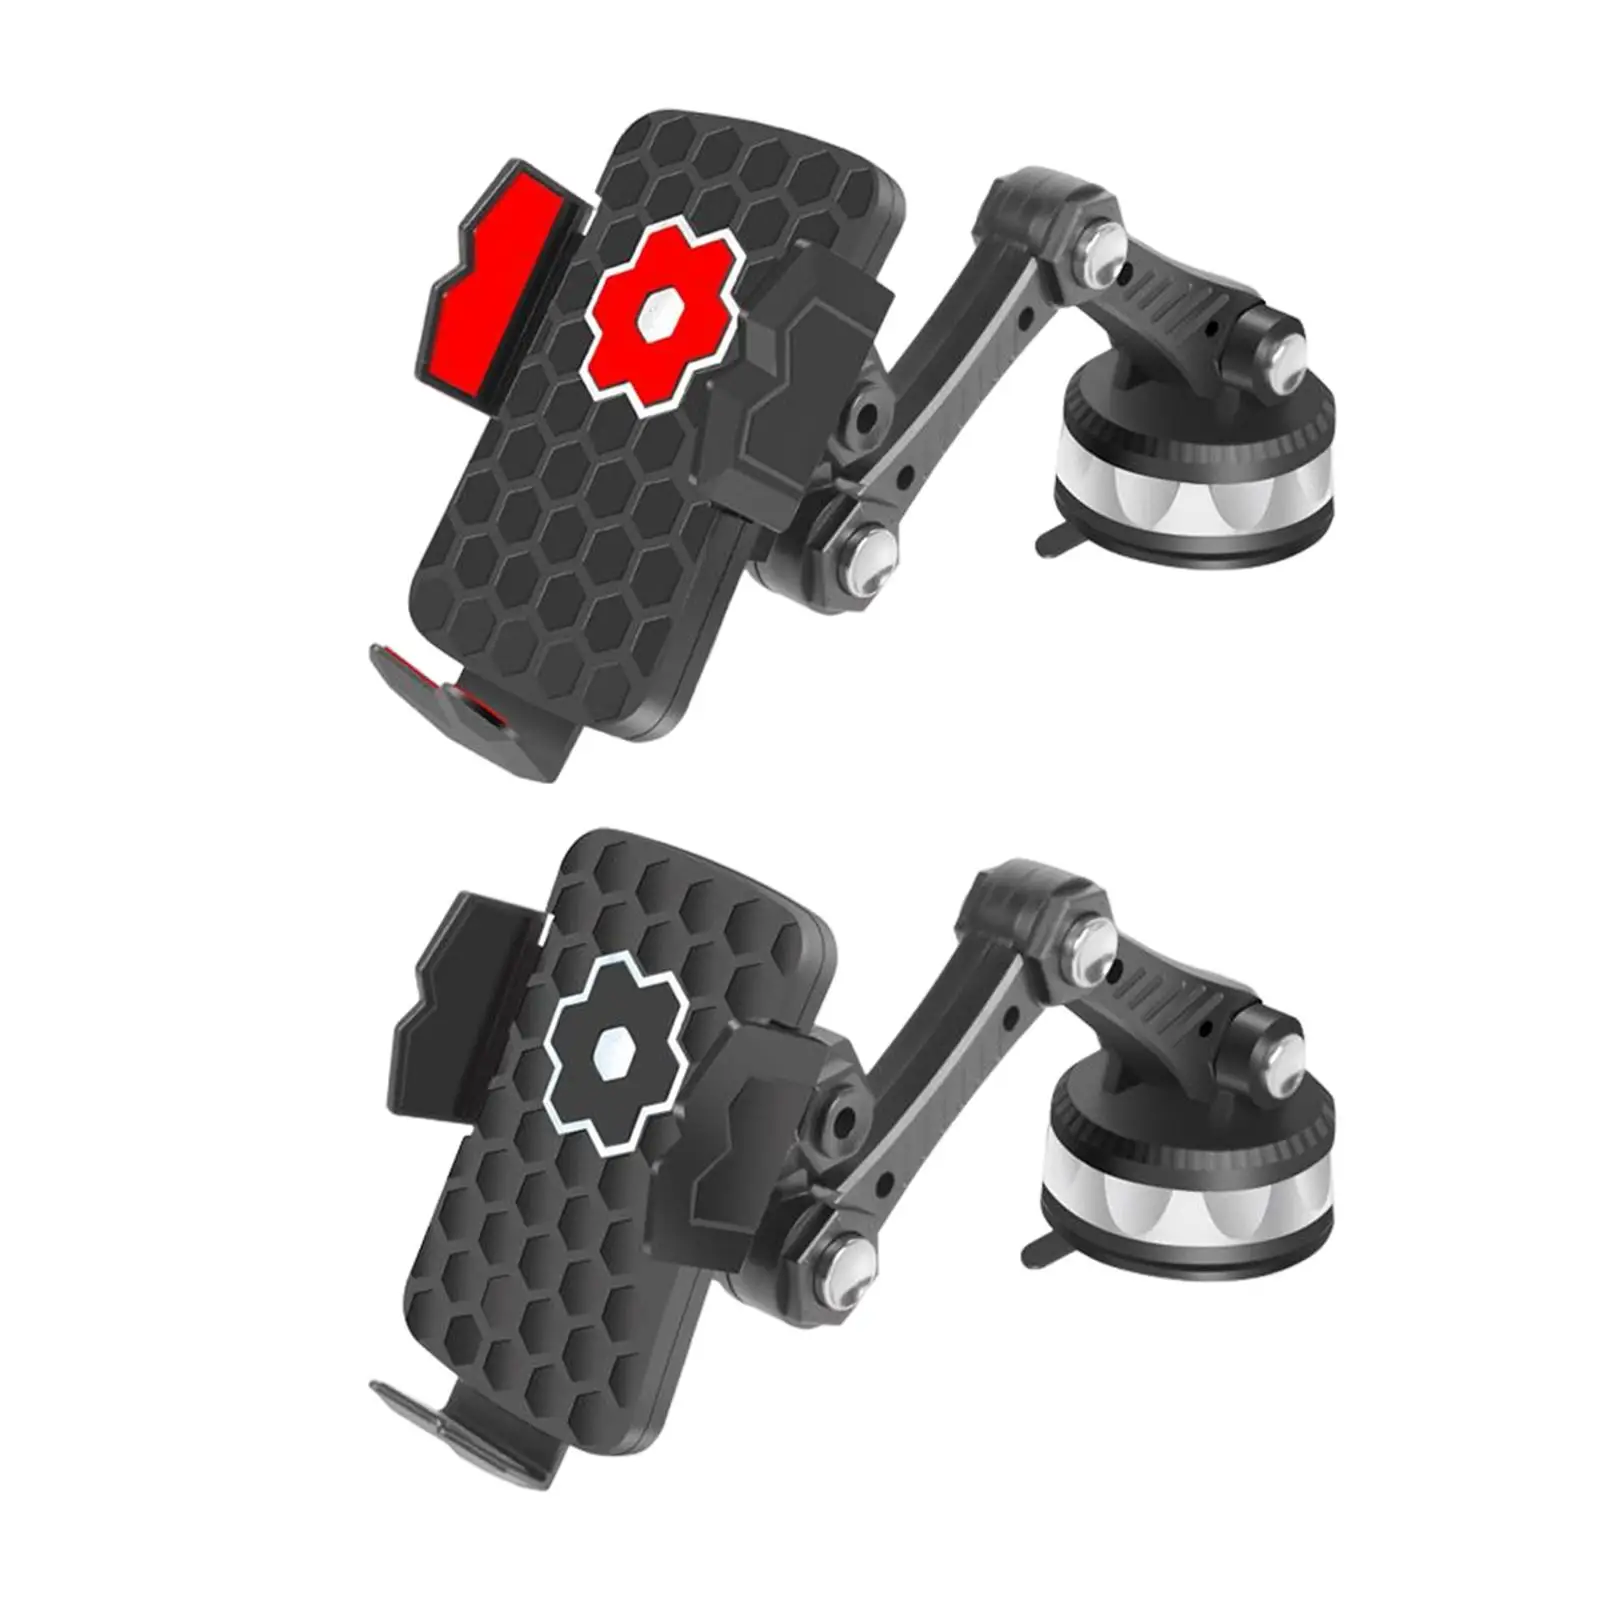 Powerful Suction Cup Phone Holder Scratchproof Smartphone Holder Stand Universal Windshield for Vehicle 4.7-7.2in Phones